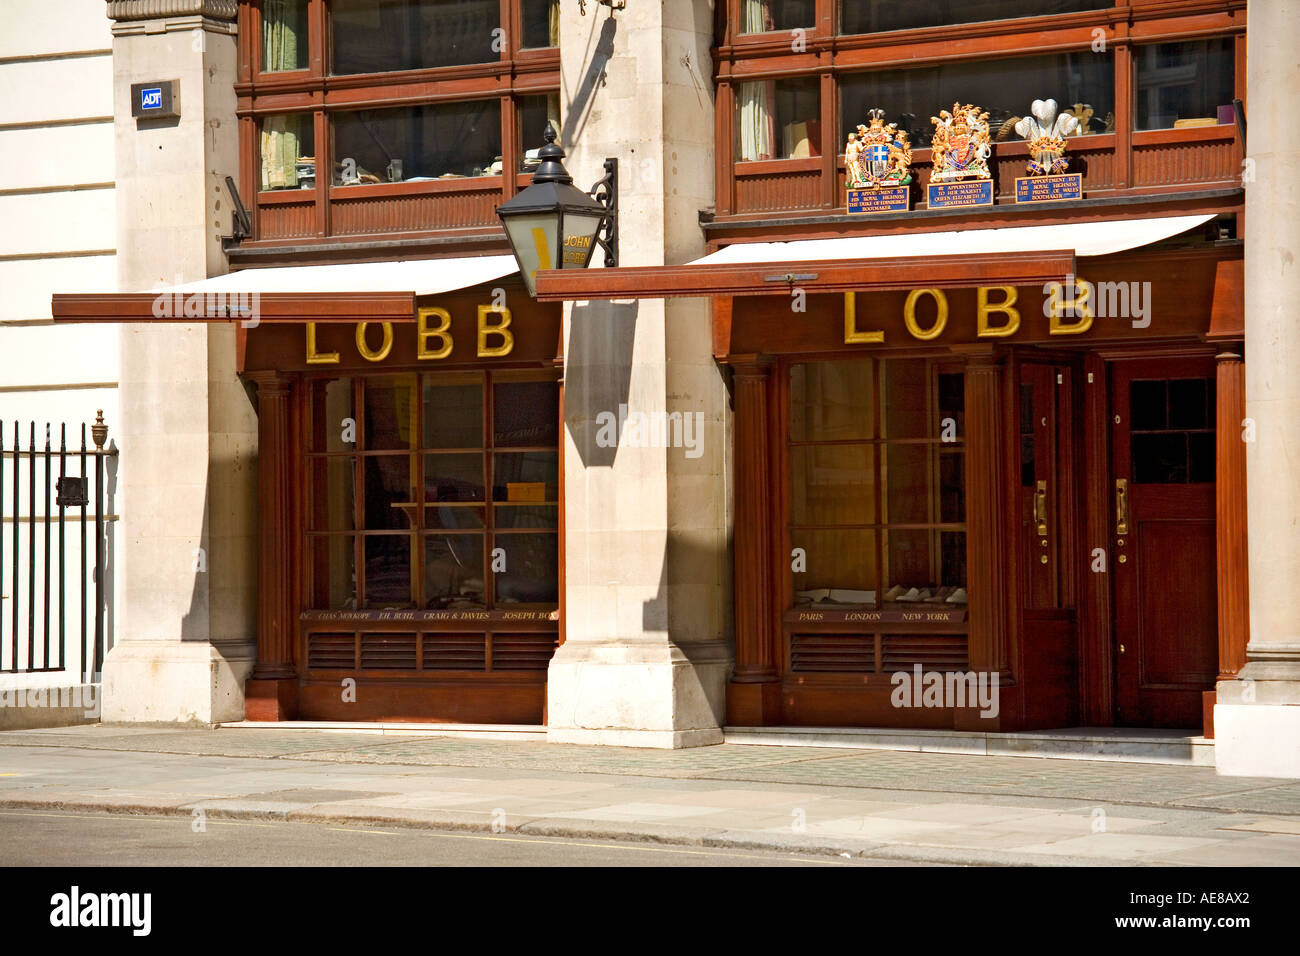 Lobb the famous shoe makers in London England Stock Photo